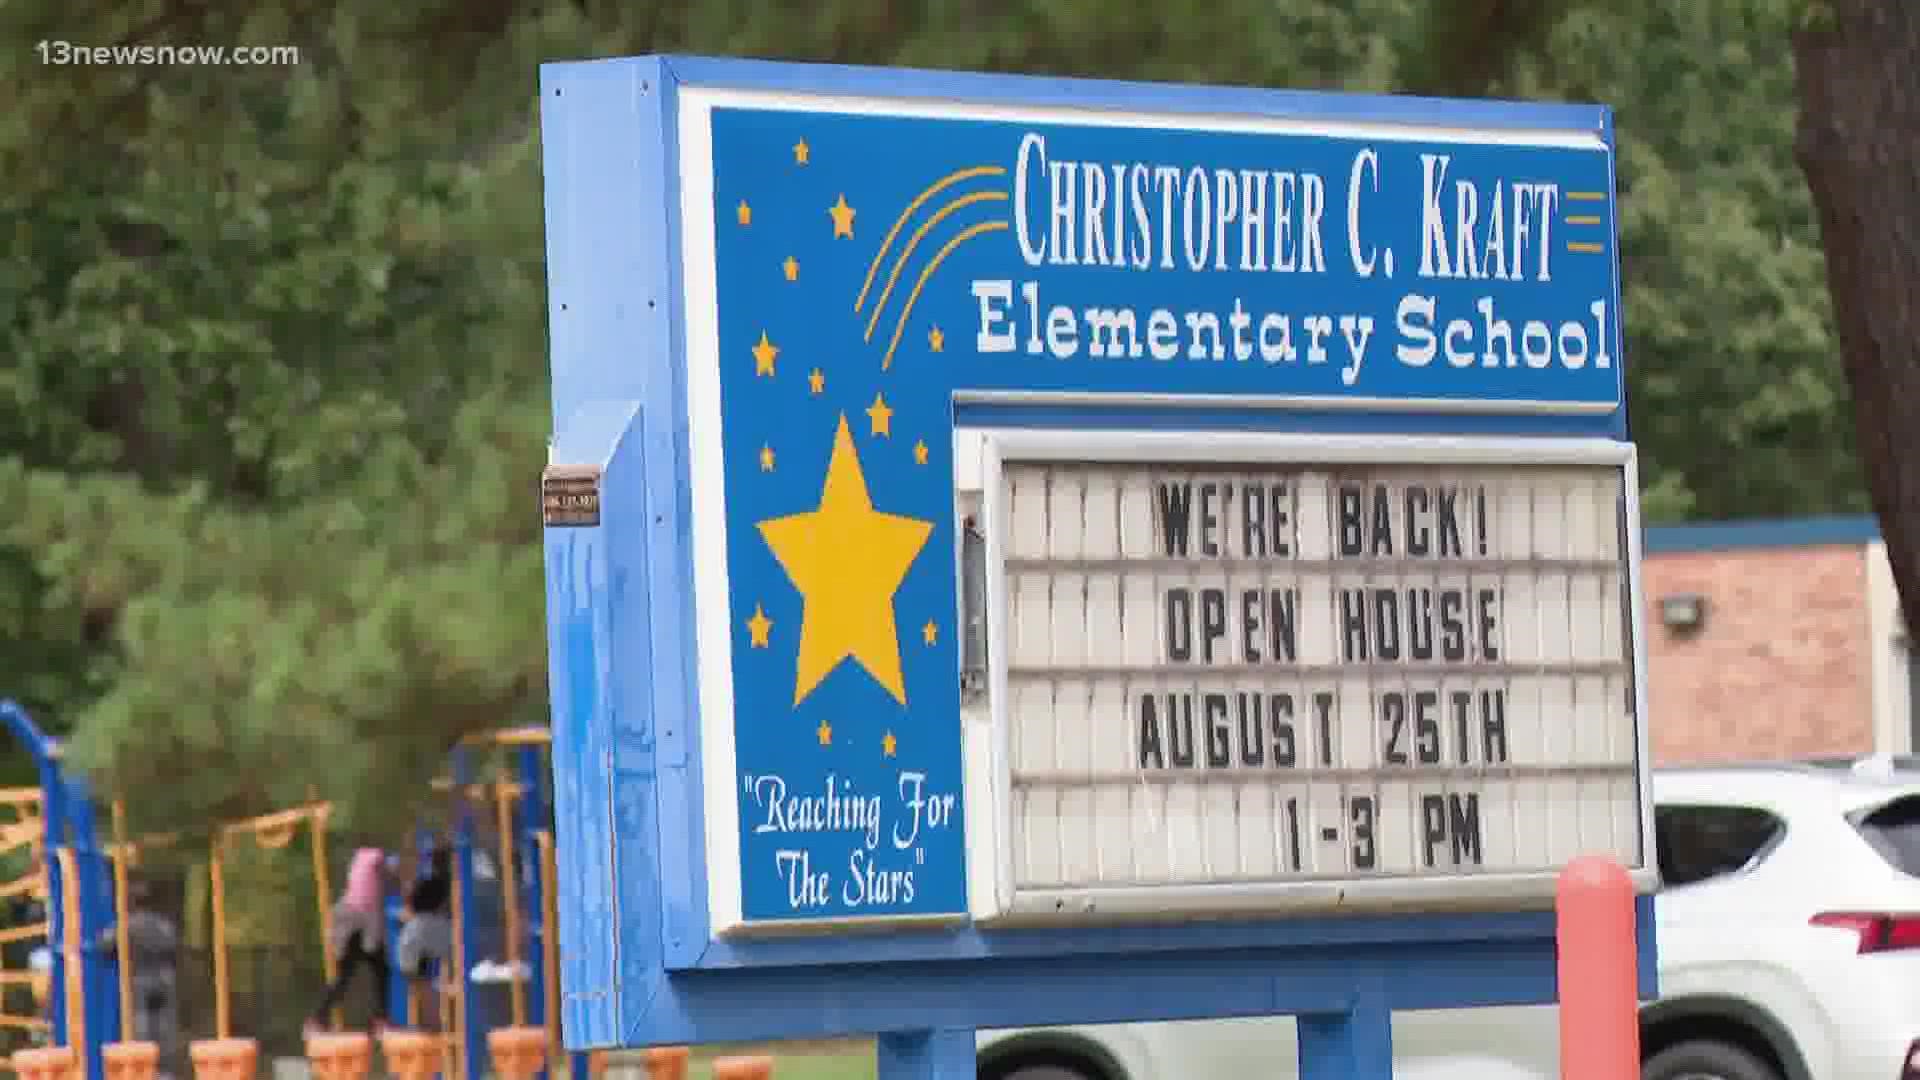 Hampton police said they caught four young girls vandalizing Christopher C. Kraft Elementary School. They ranged in ages 7 to 12.